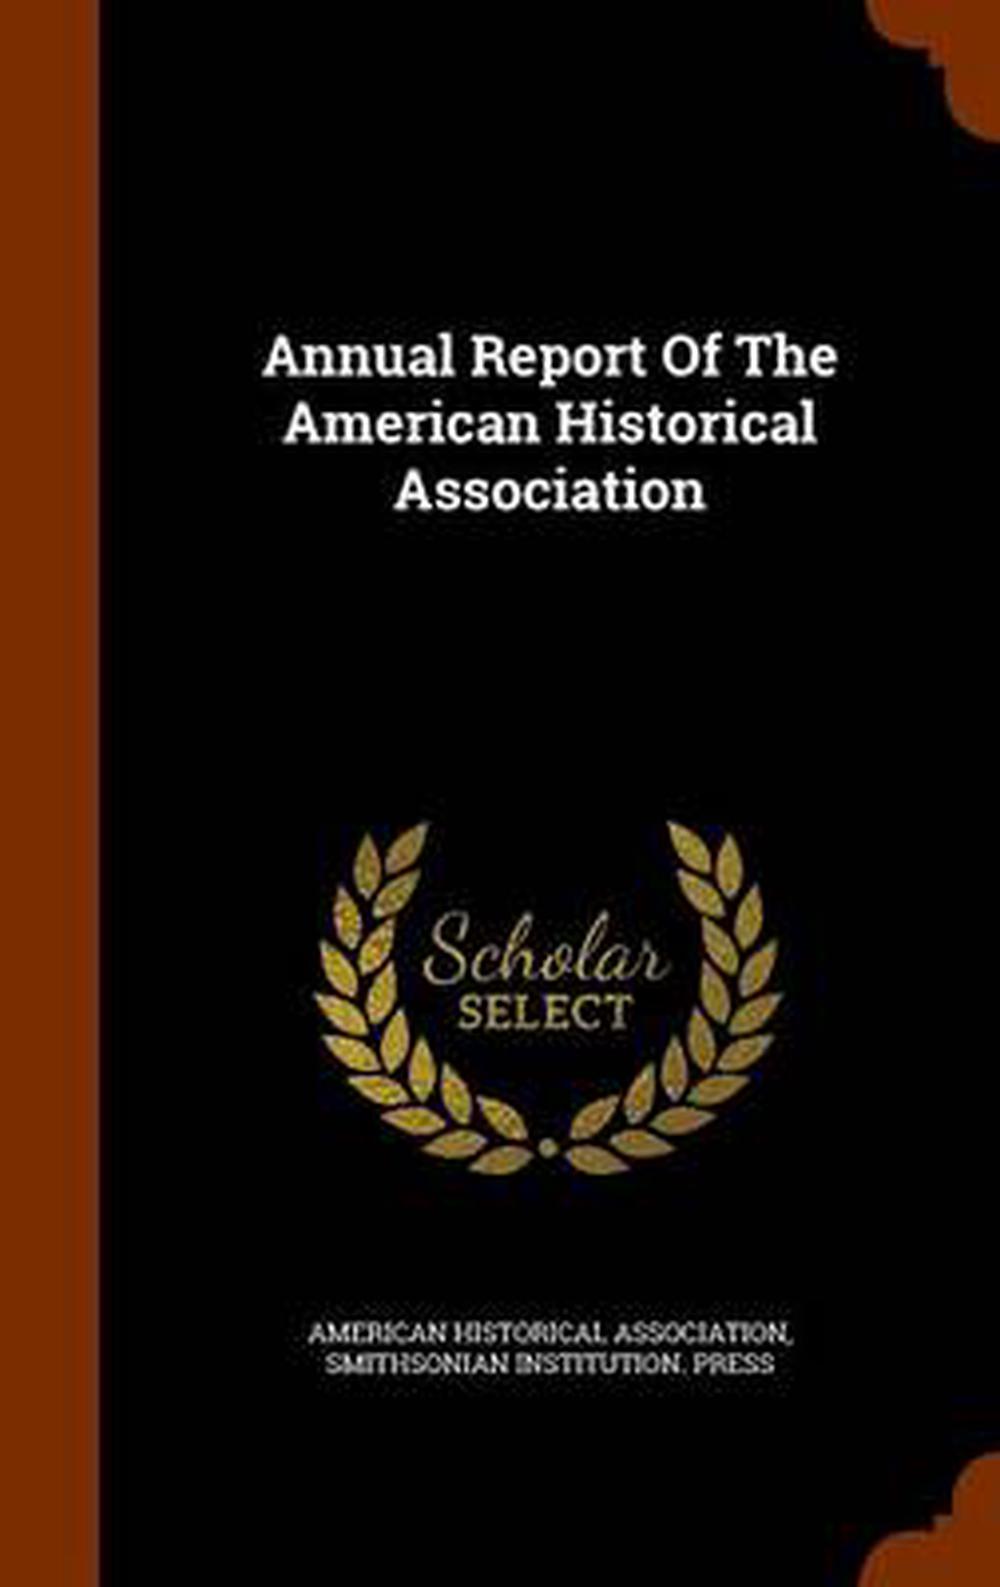 Annual Report of the American Historical Association by American